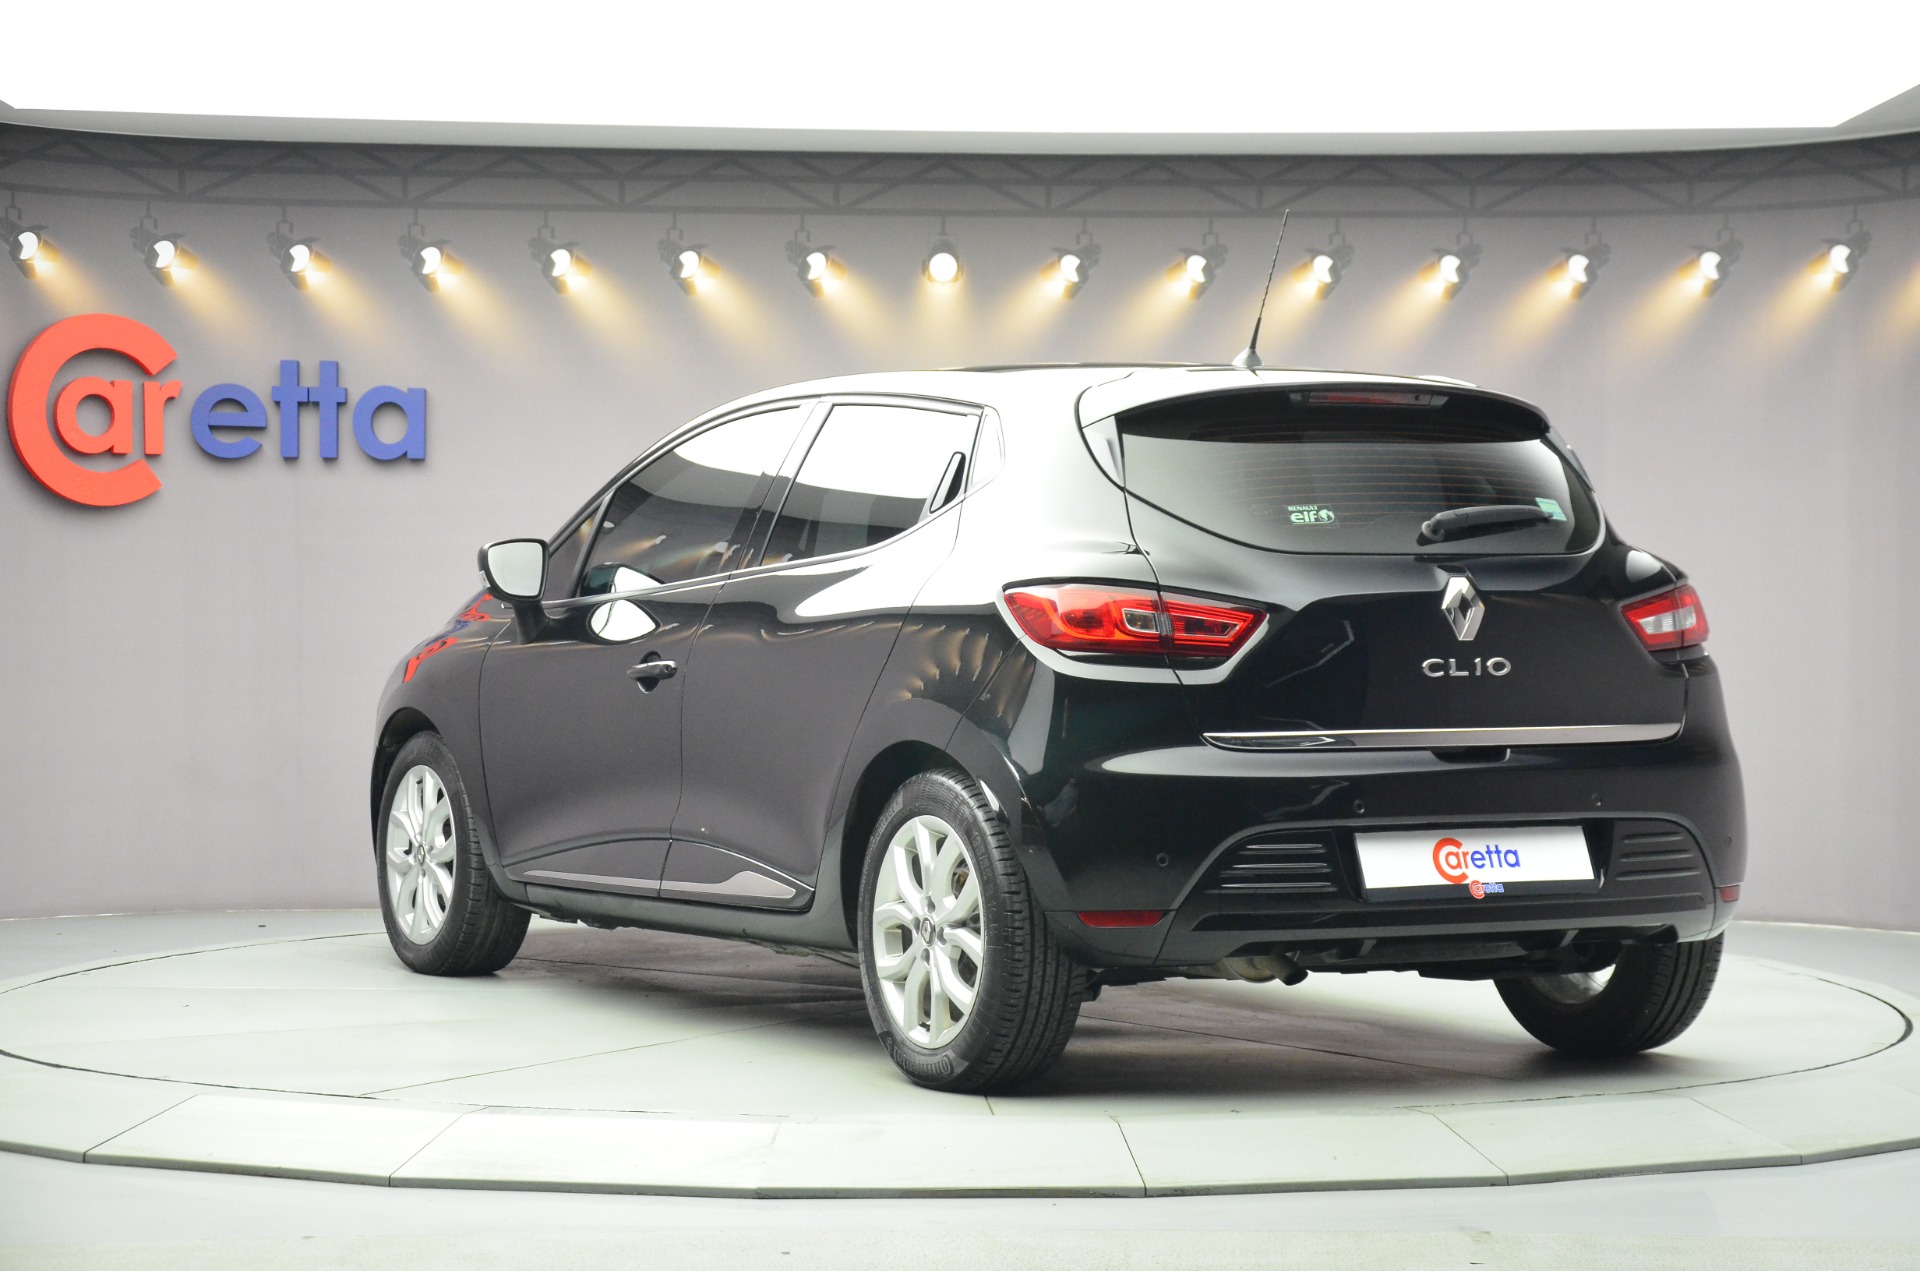 2018 Model Renault Clio 1.2 Turbo Touch-6